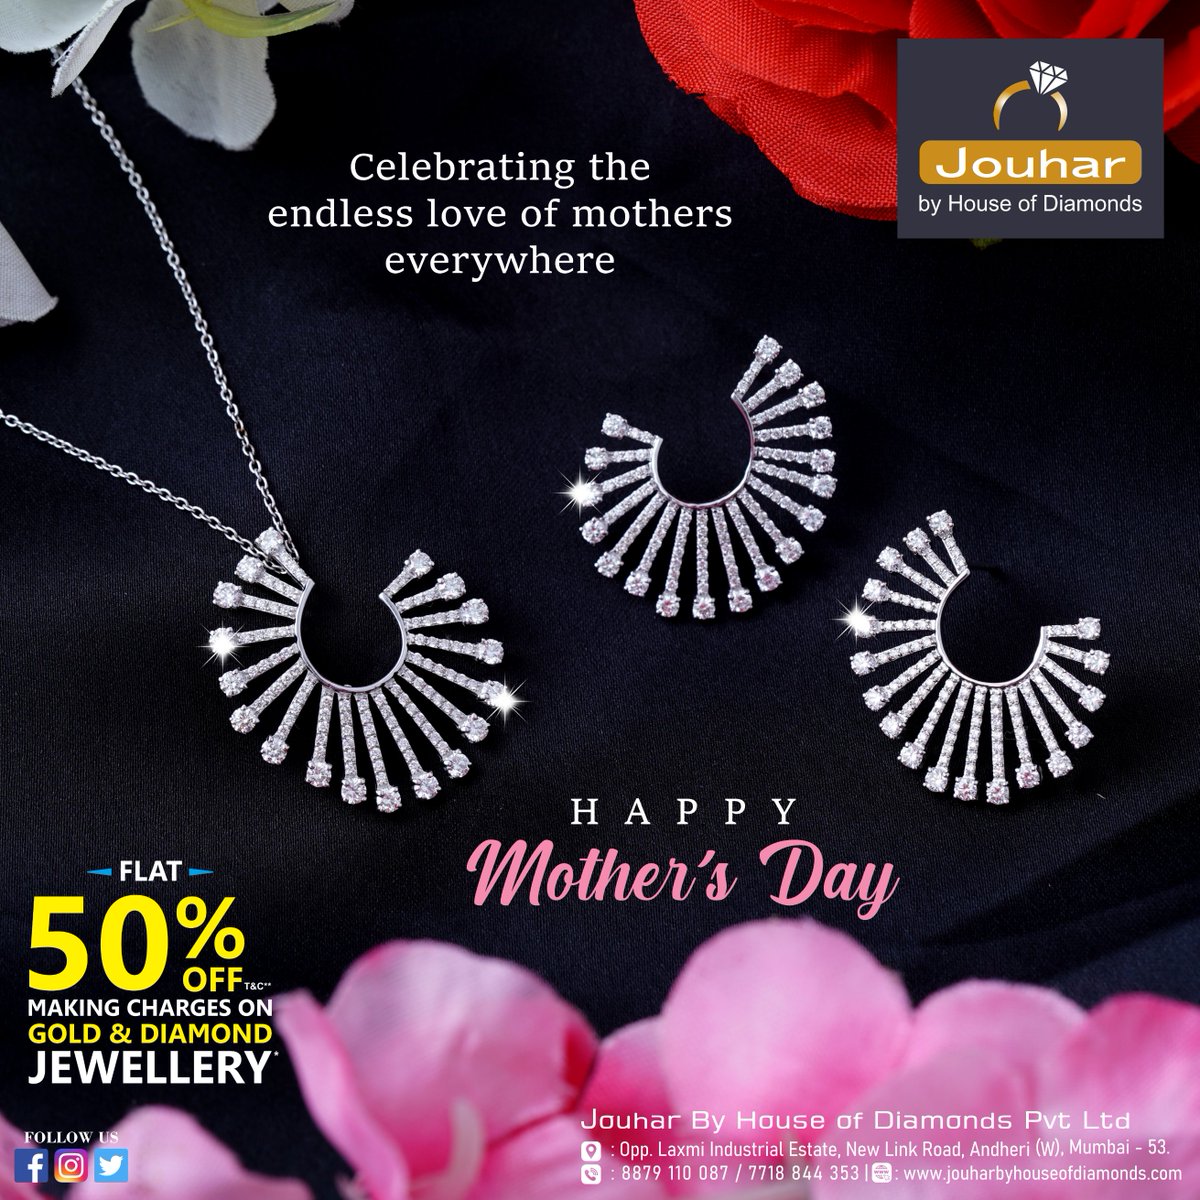 Happy Mother's Day Celebrating the endless love of mothers everywhere

FLAT 50% Off Making Charges on GOLD & DIAMOND JEWELLERY

#MothersDayGifts #MothersDayJewelry #MomGifts #MomJewelry #PendantSet #NecklaceSet #FamilyJewelry #PersonalizedJewelry #BirthstoneJewelry